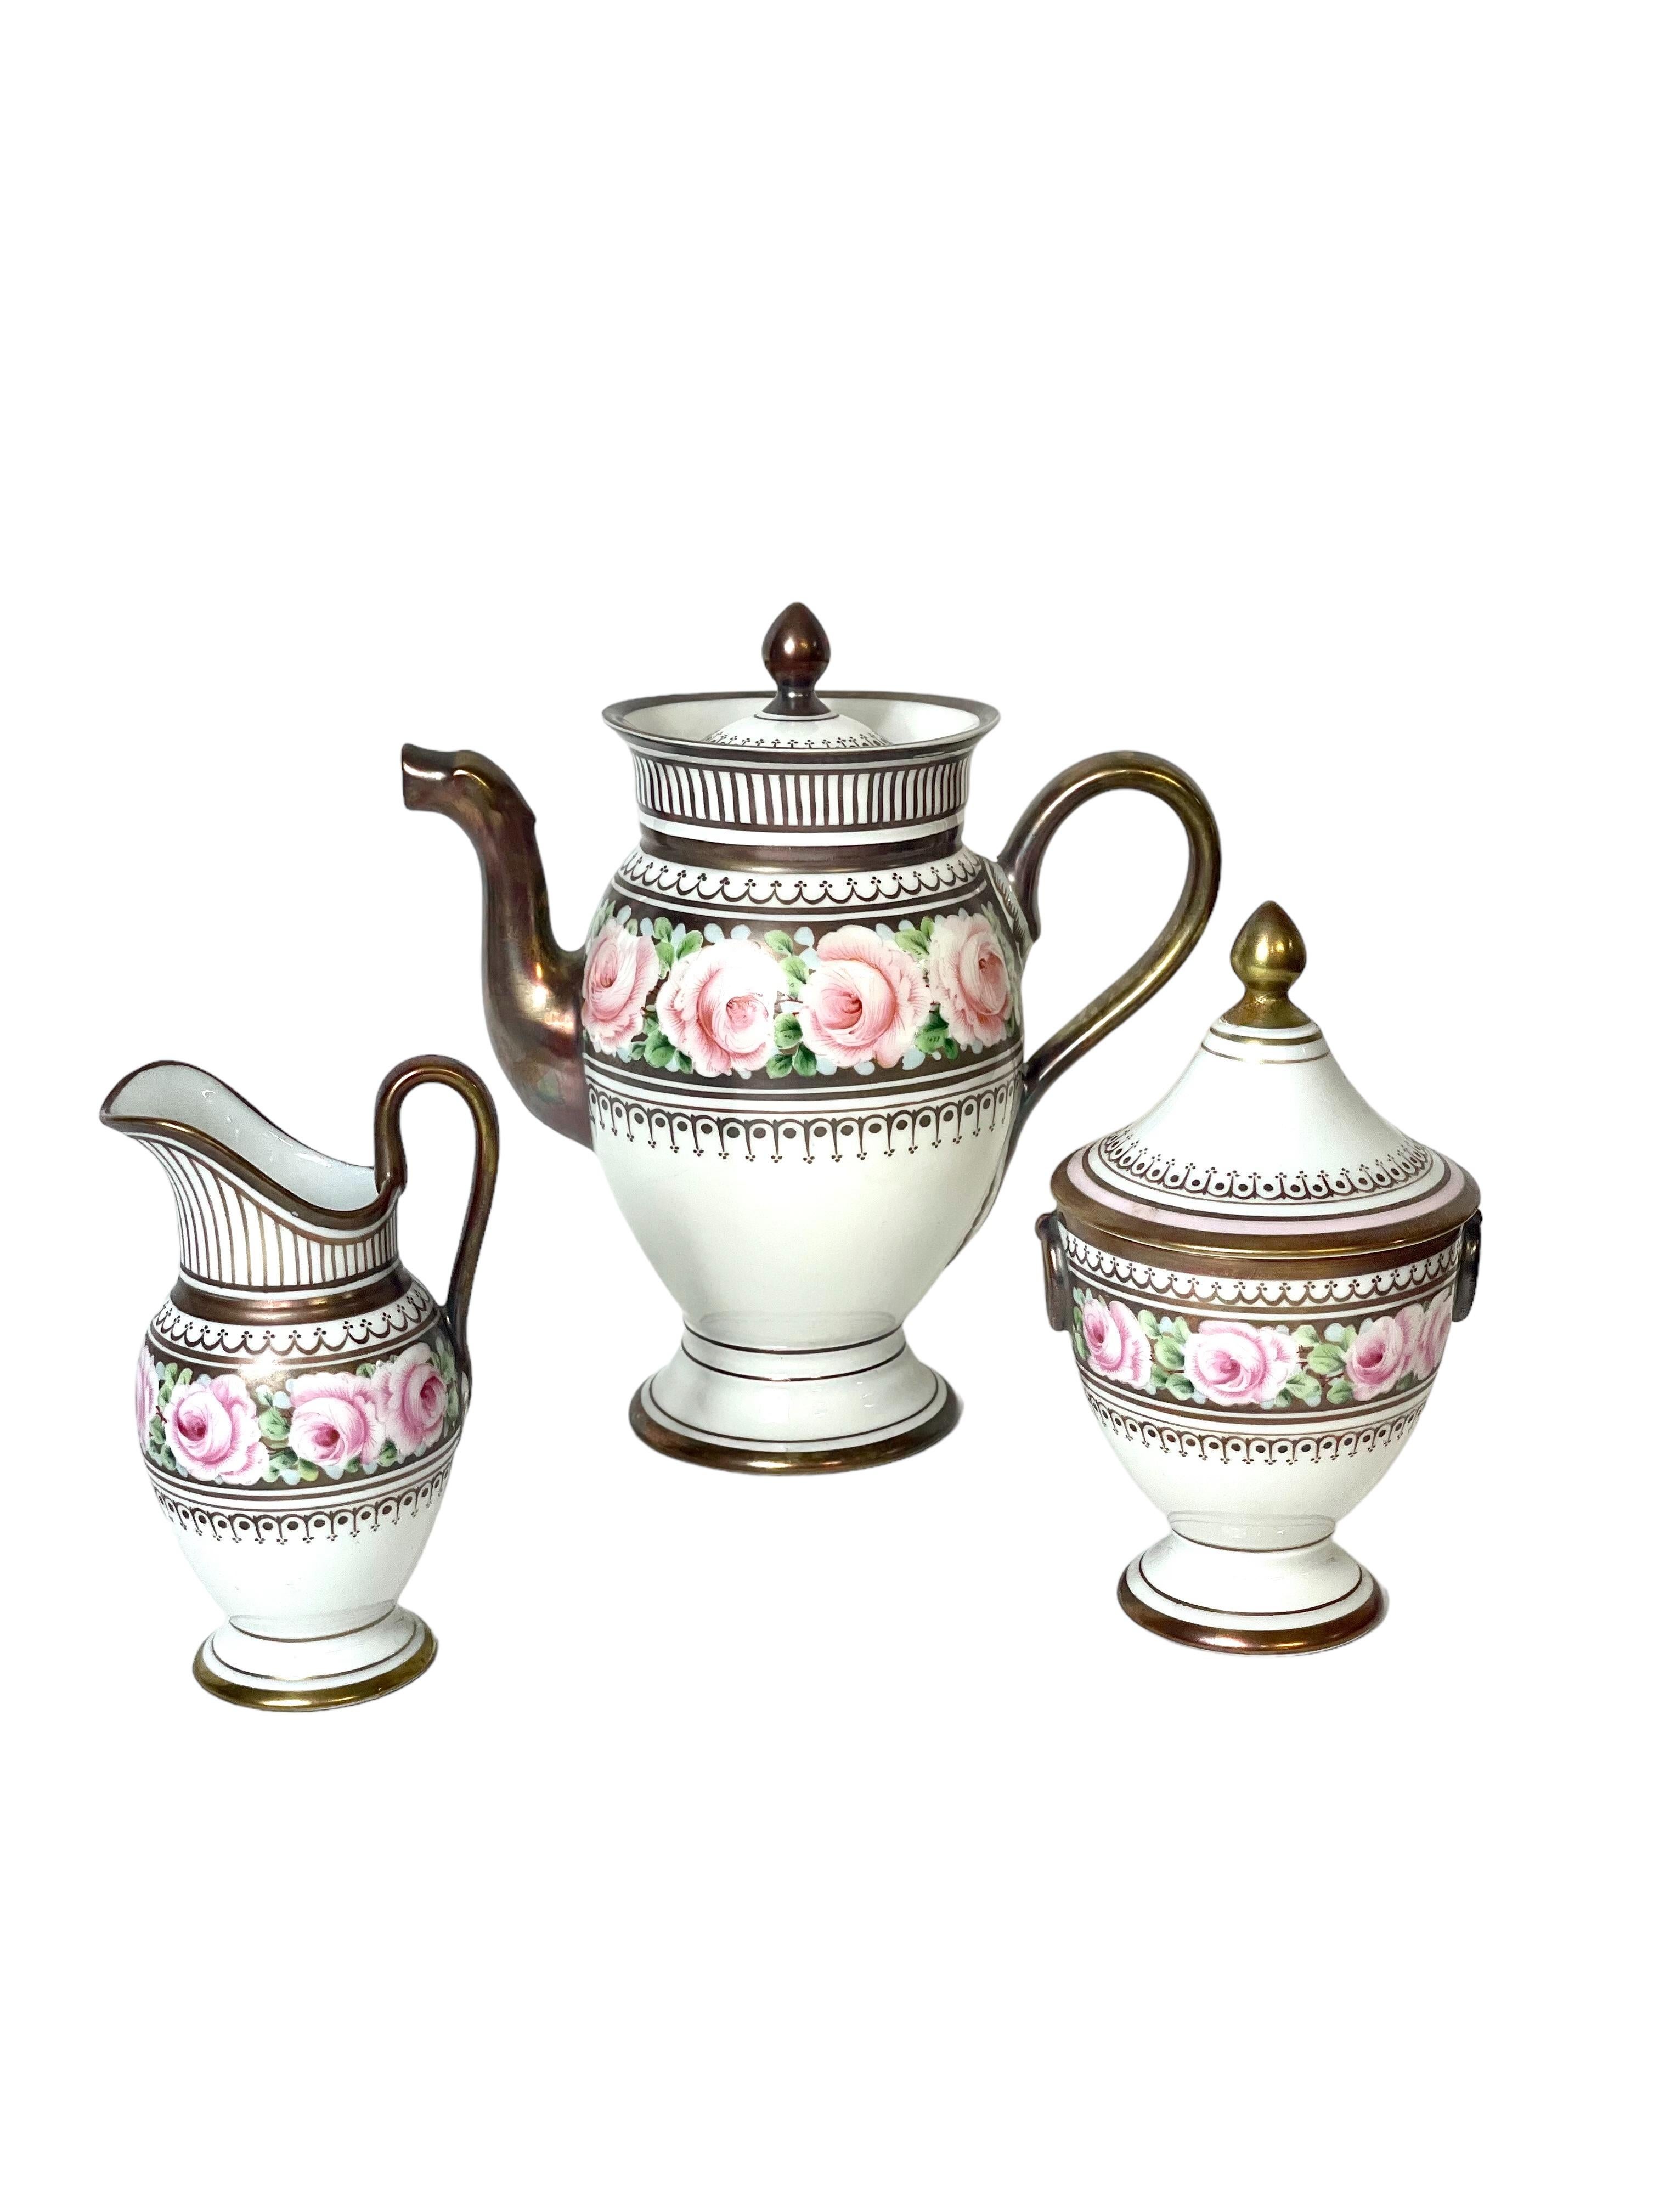 20th Century French Vintage Empire Style Porcelain Coffee Service with a decor of Flowers For Sale